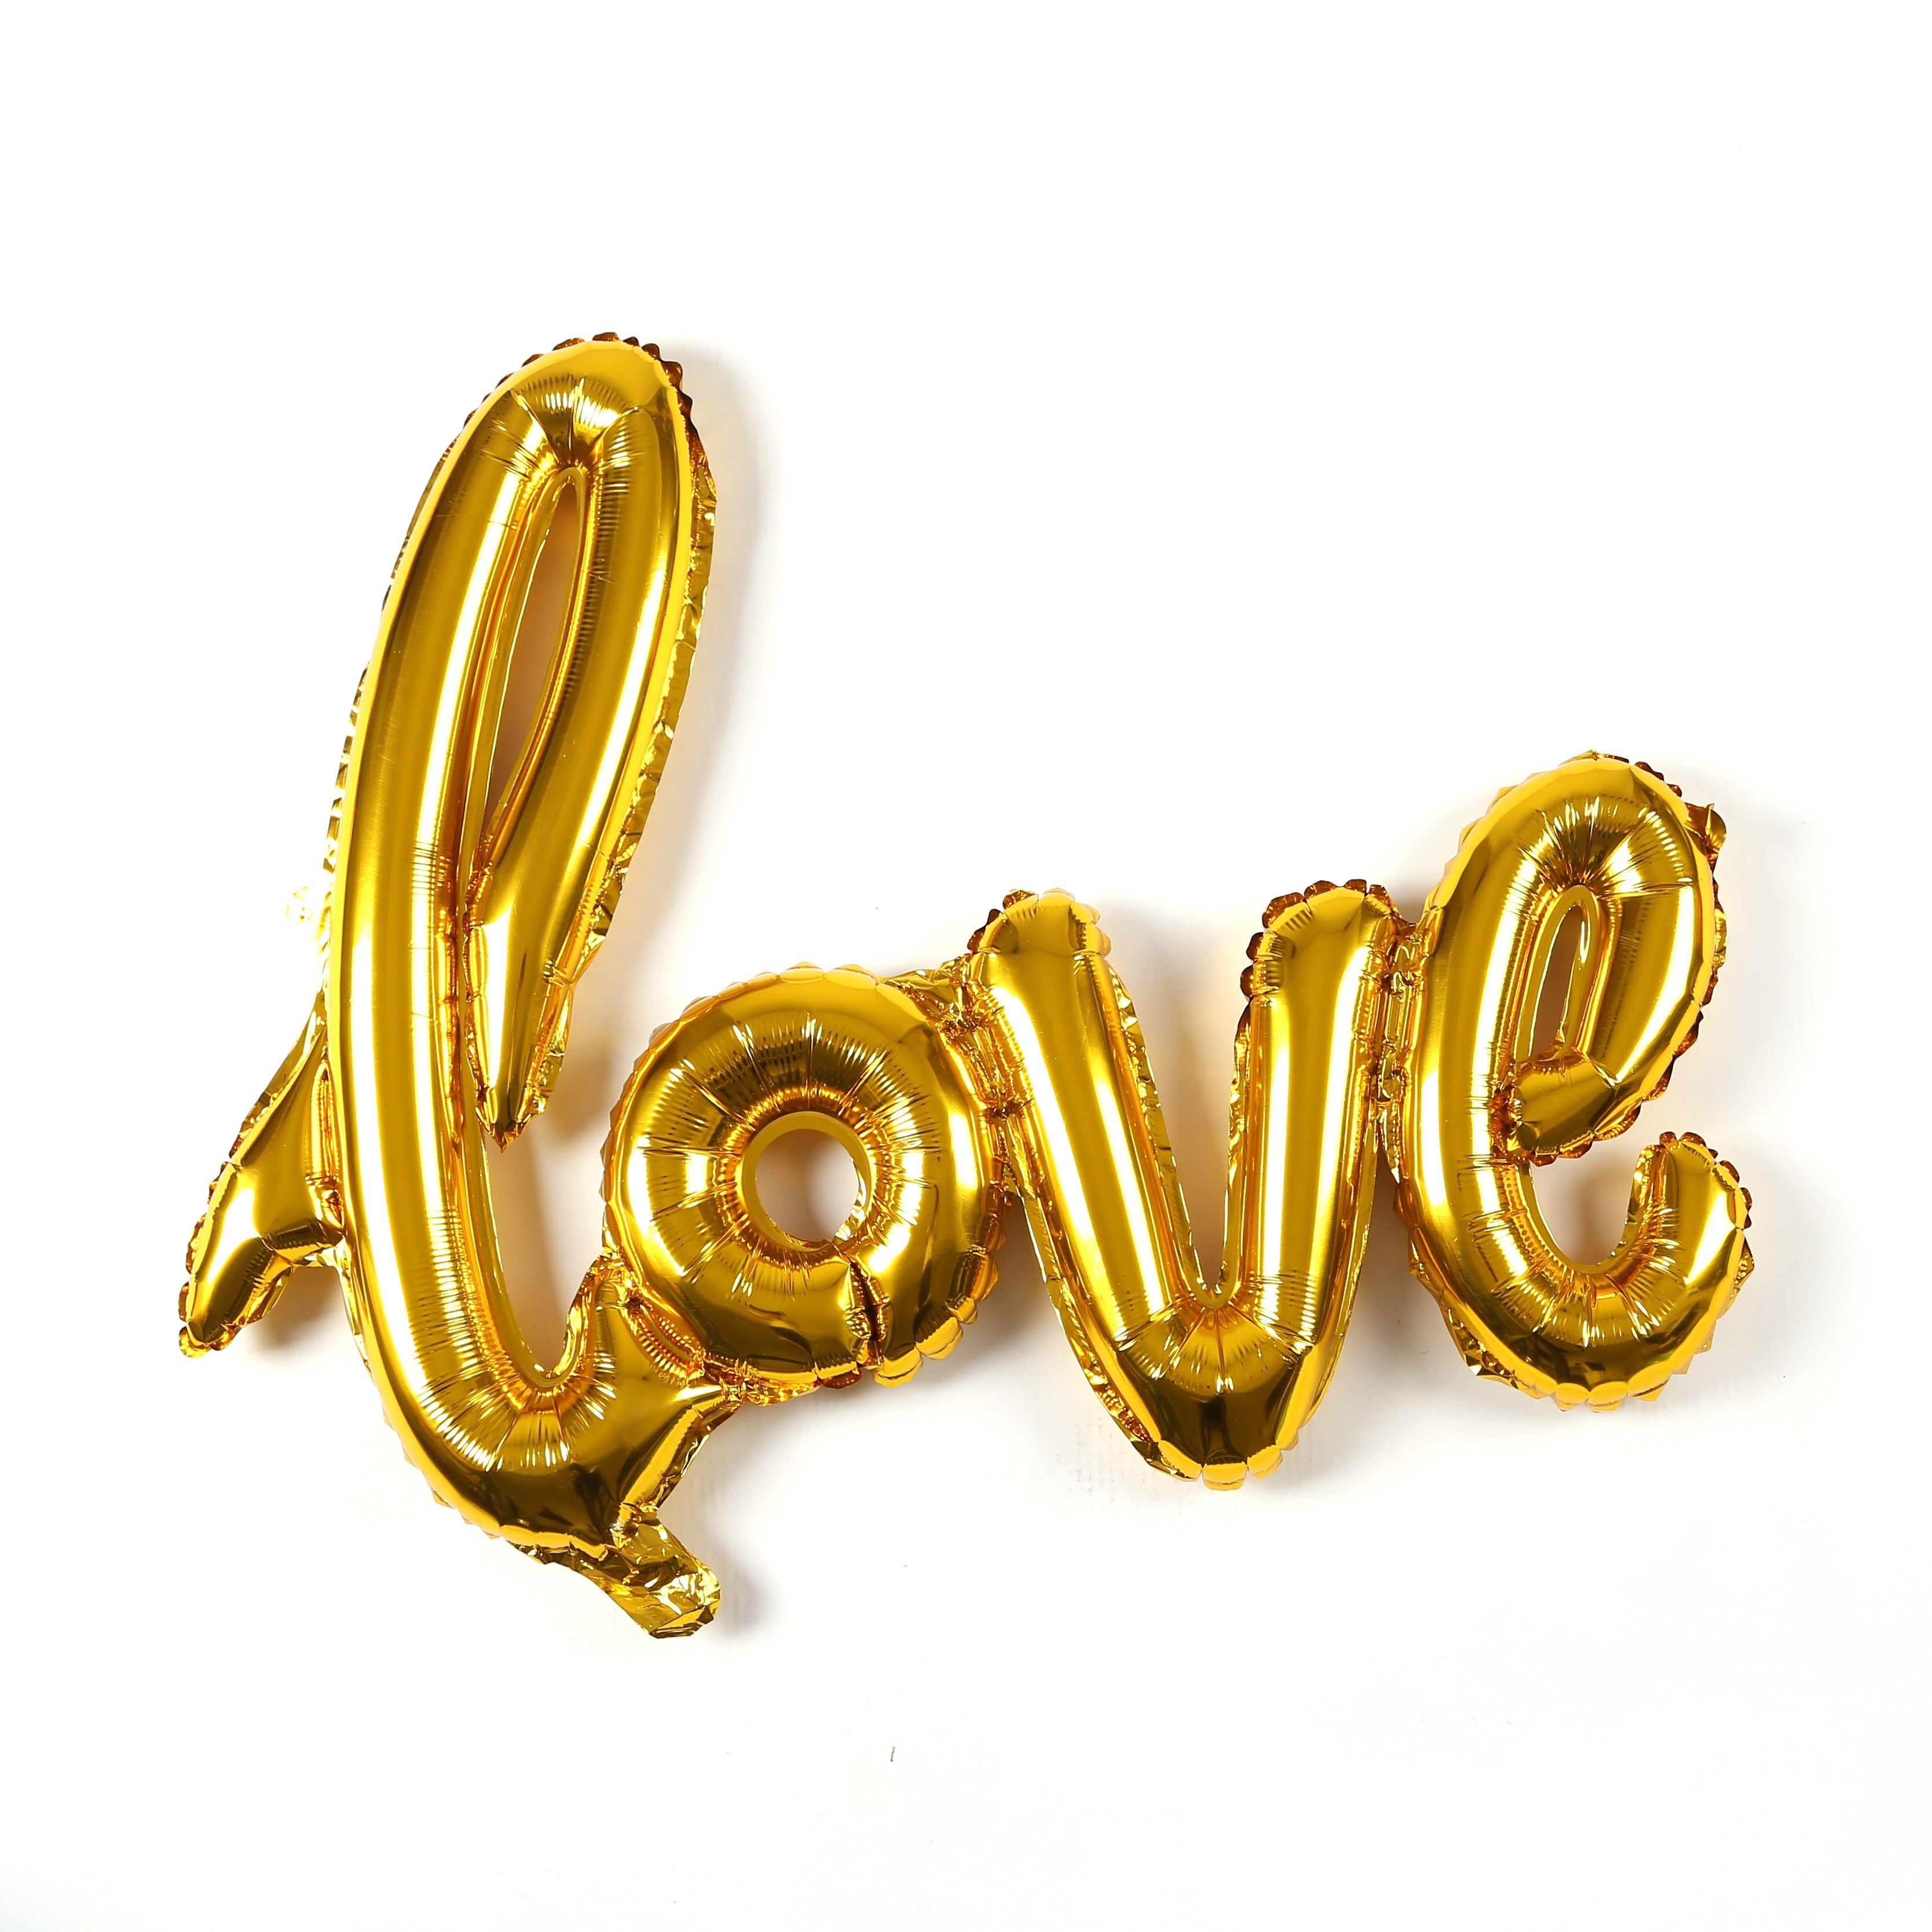 A giant rose gold letter balloon of "LOVE". perfect for engagement, bridal shower, wedding and birthday theme. romantic party decoration